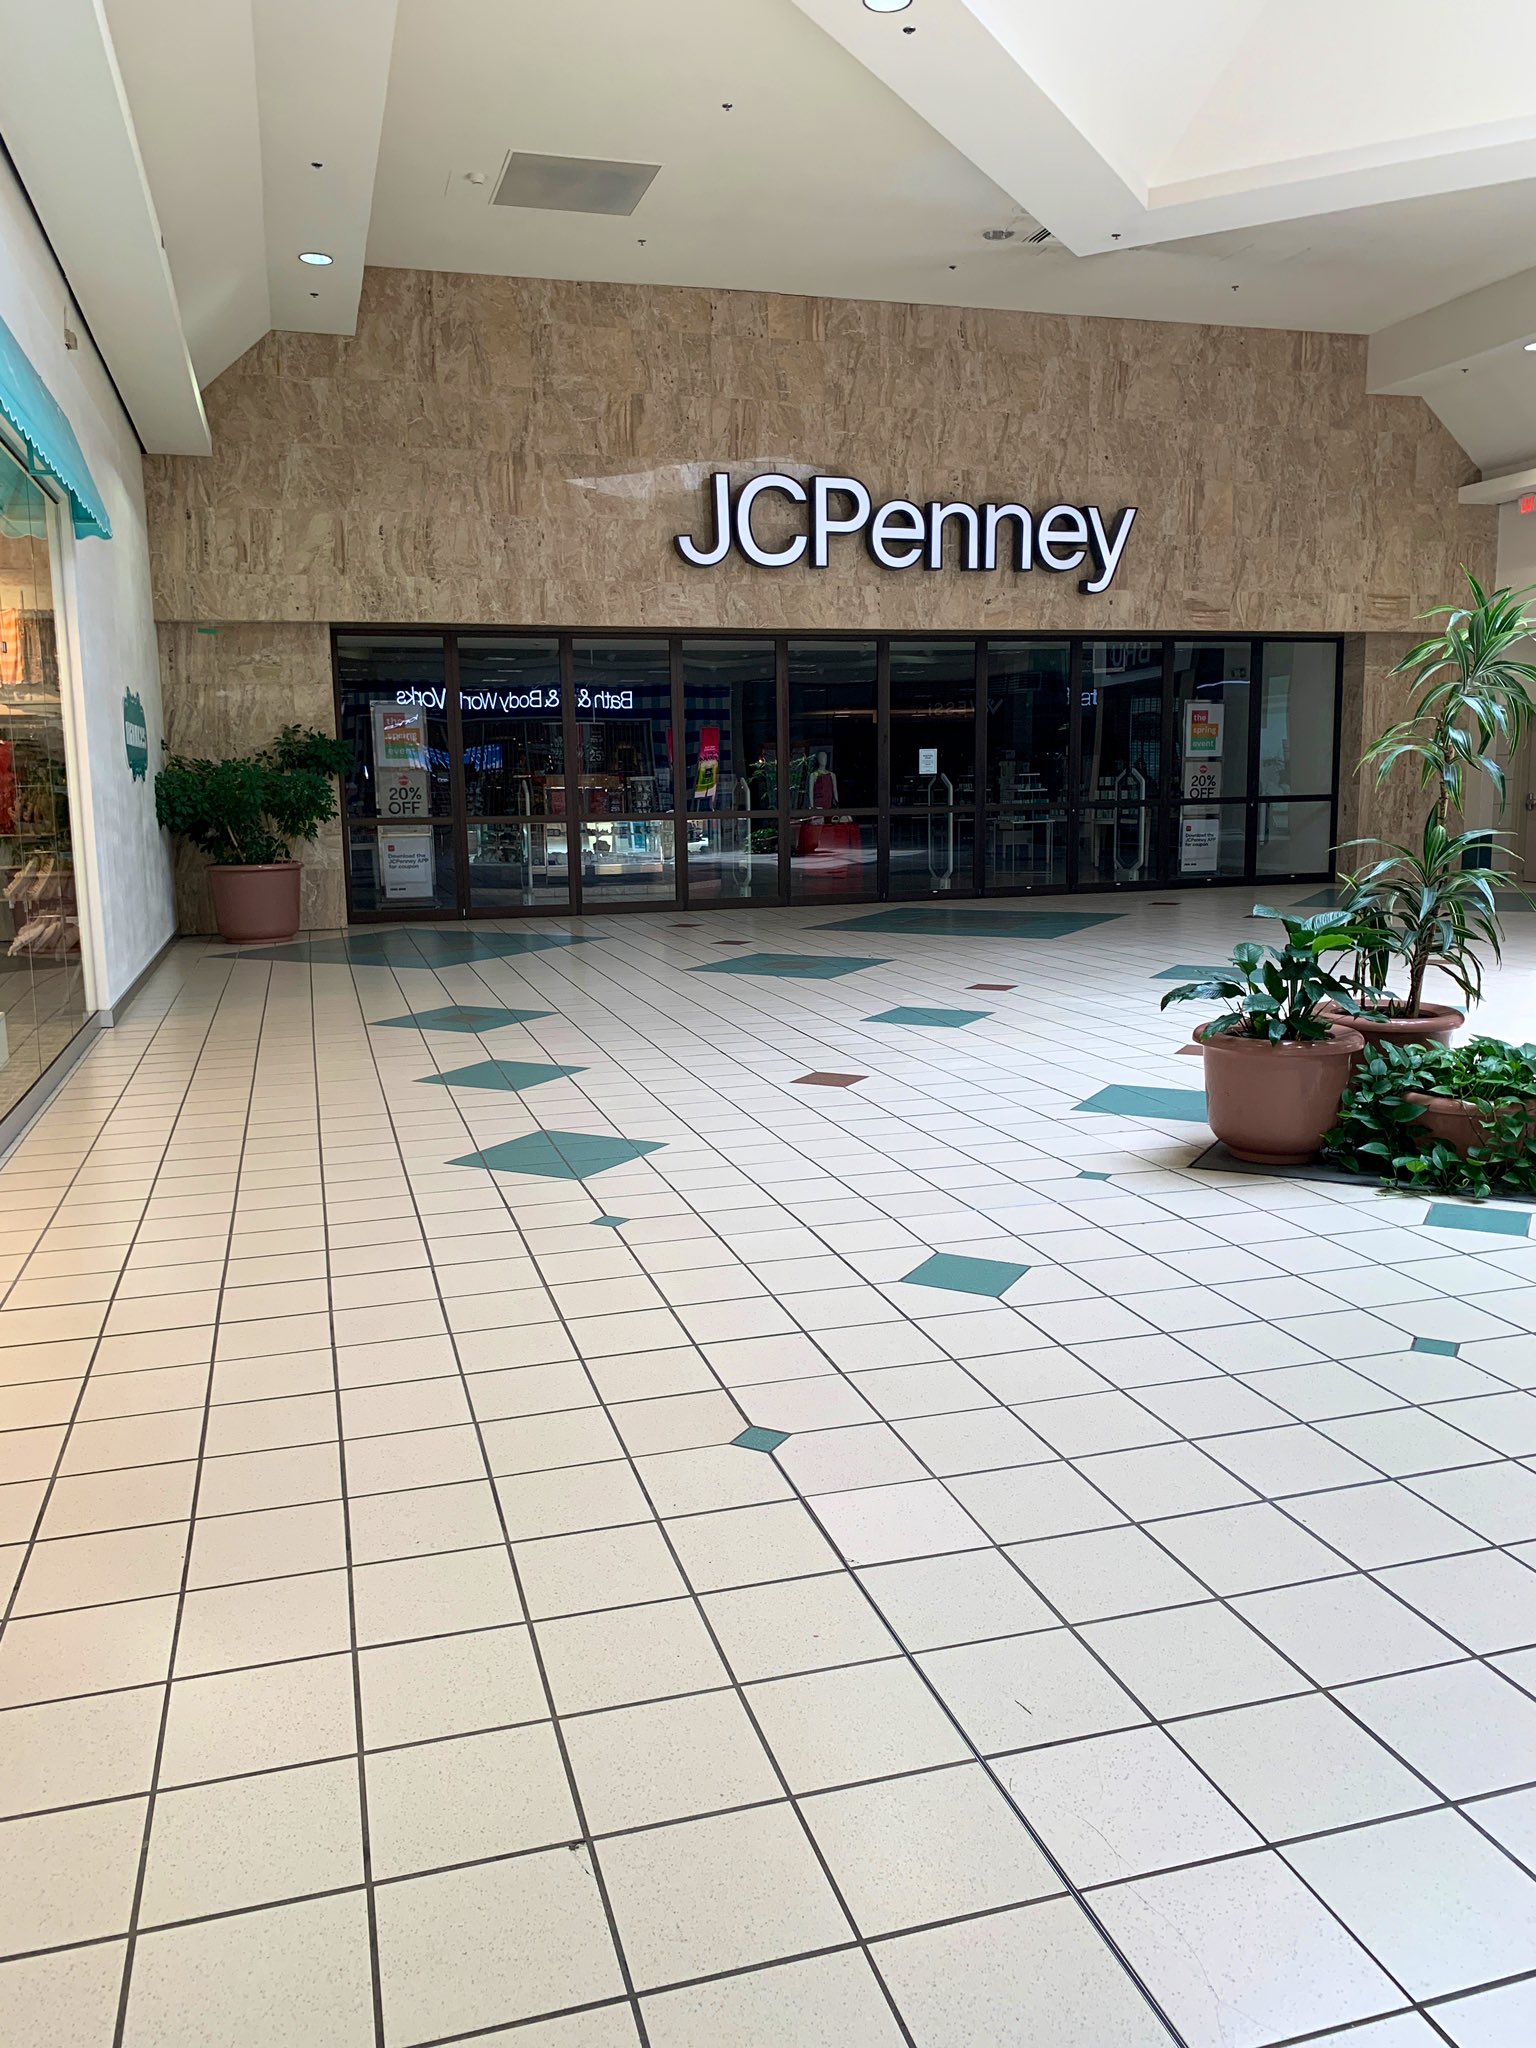 Lauren Thomas on X: Weekly local mall update from mom. JC Penney